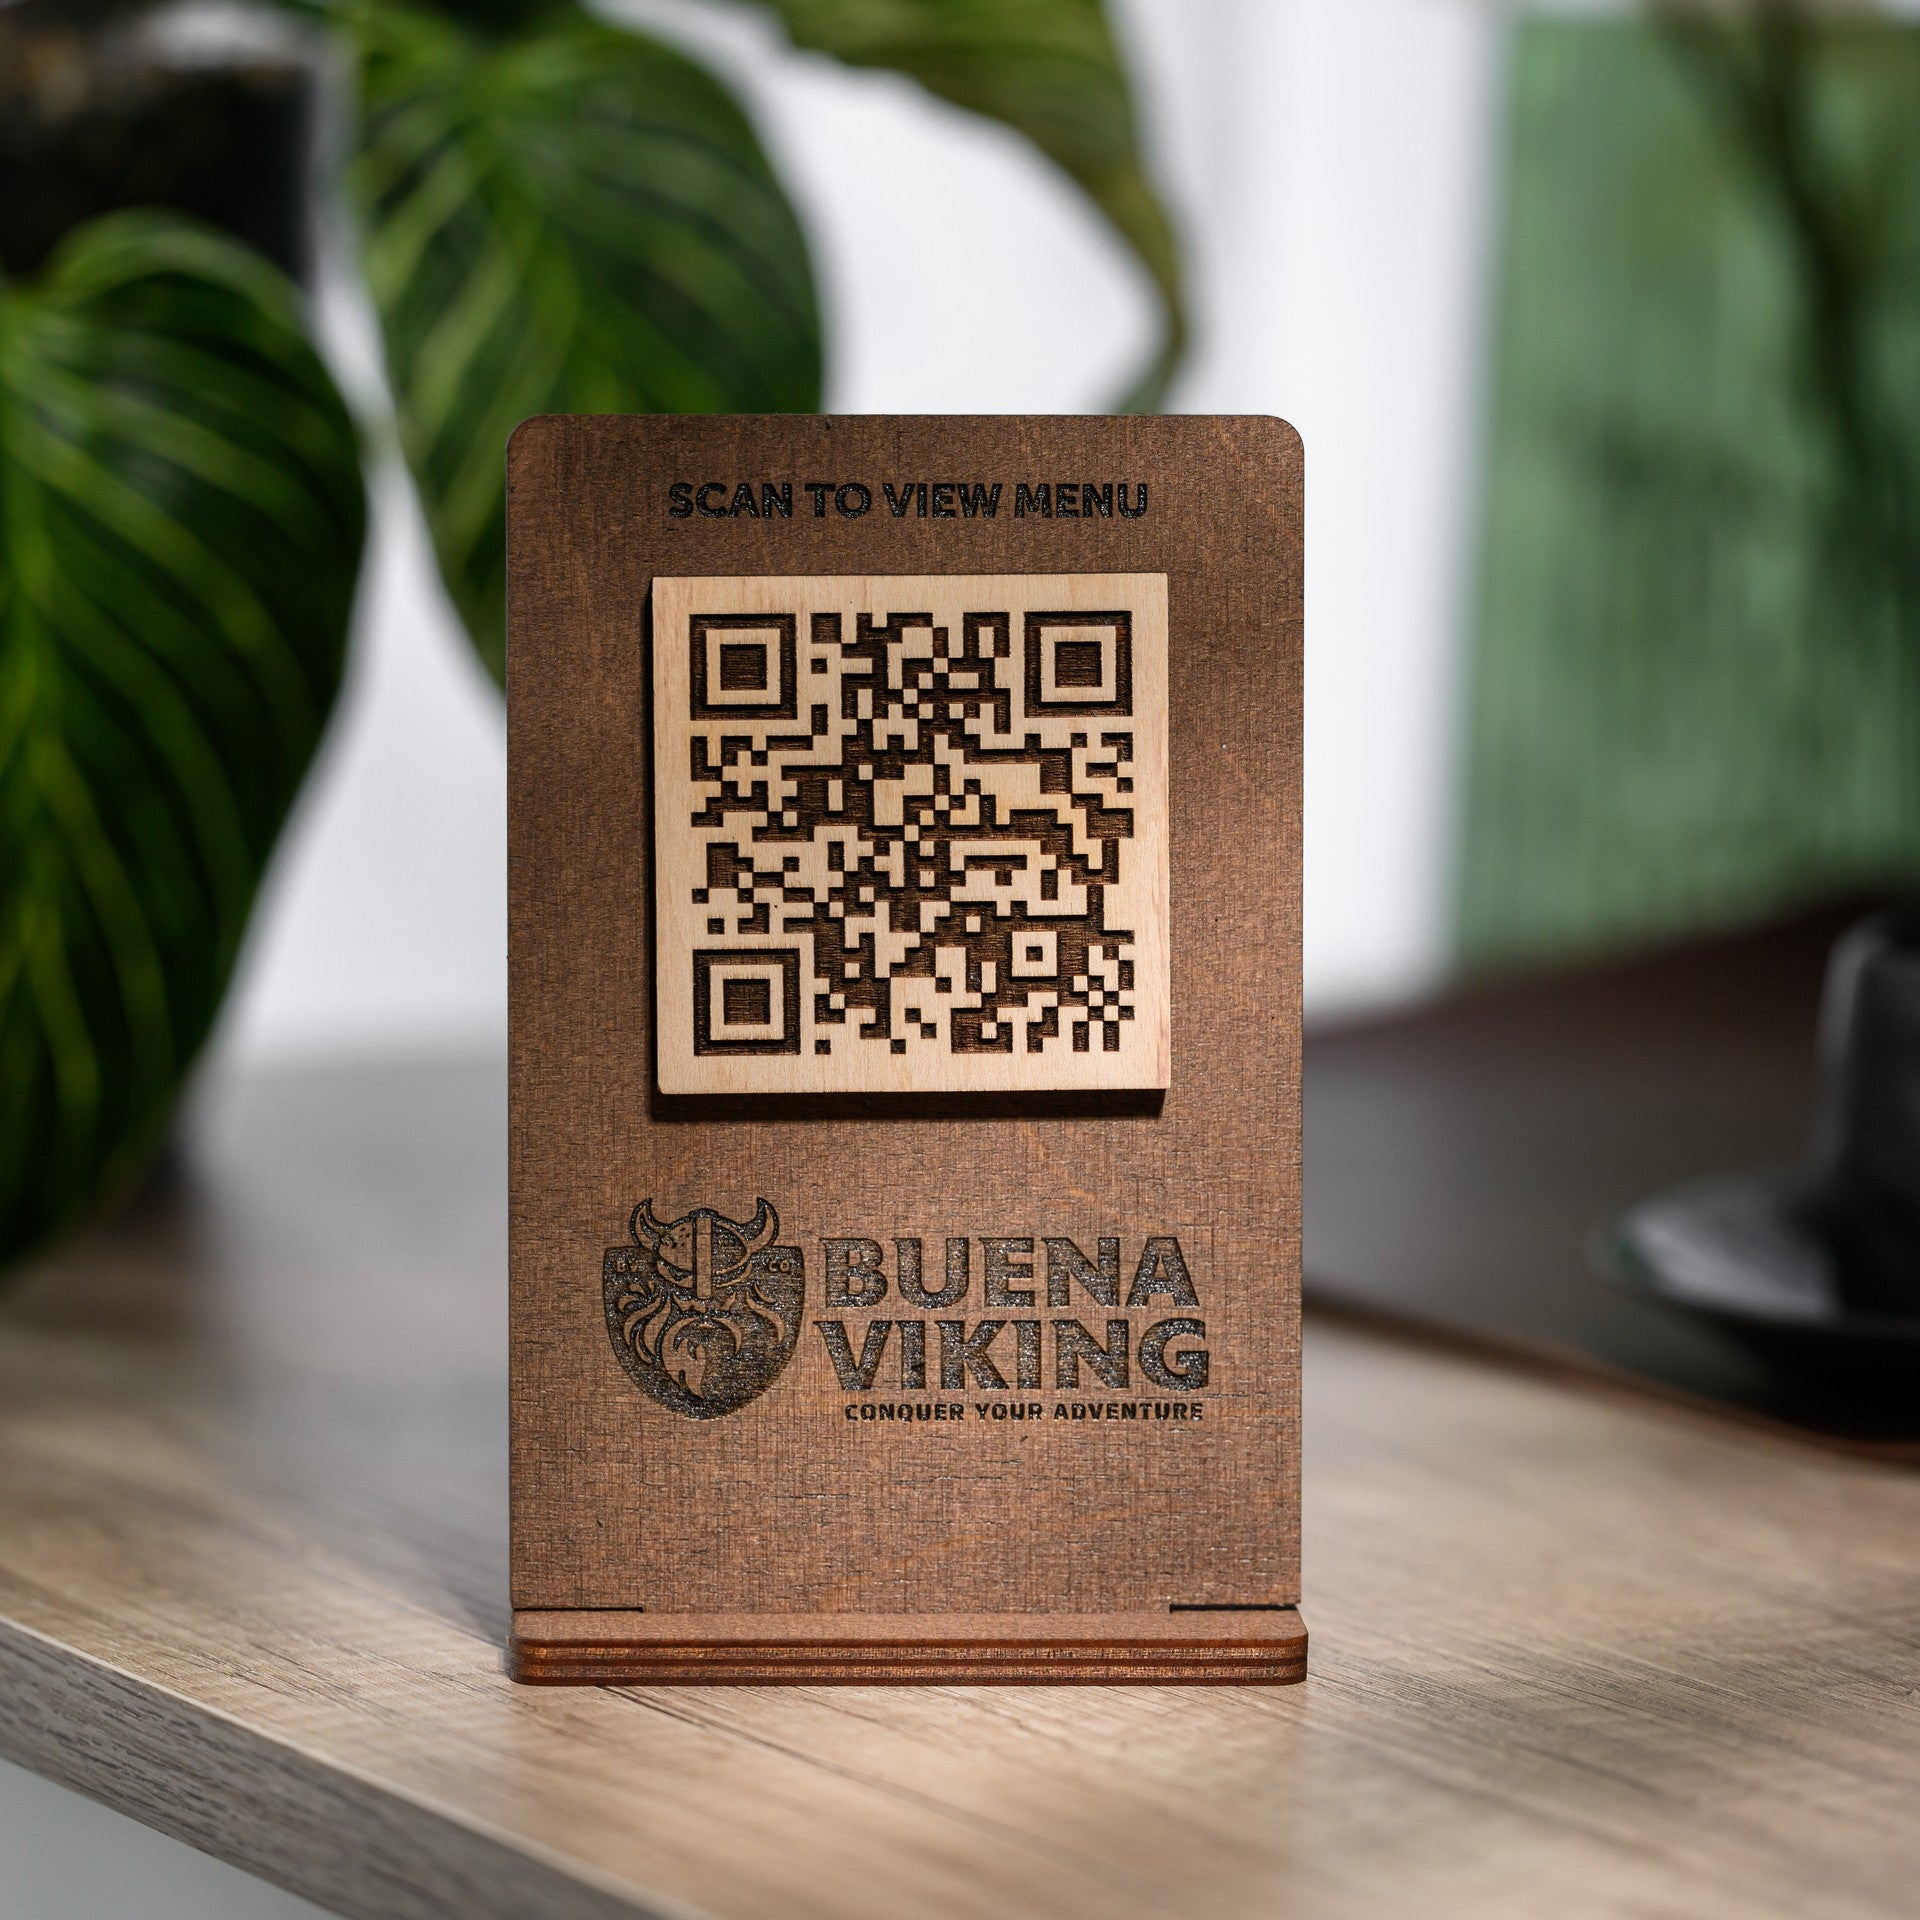 Scannable Price List on a Menu QR Sign Stand. Desktop-friendly design, perfect for touchless interactions in bars and restaurants.